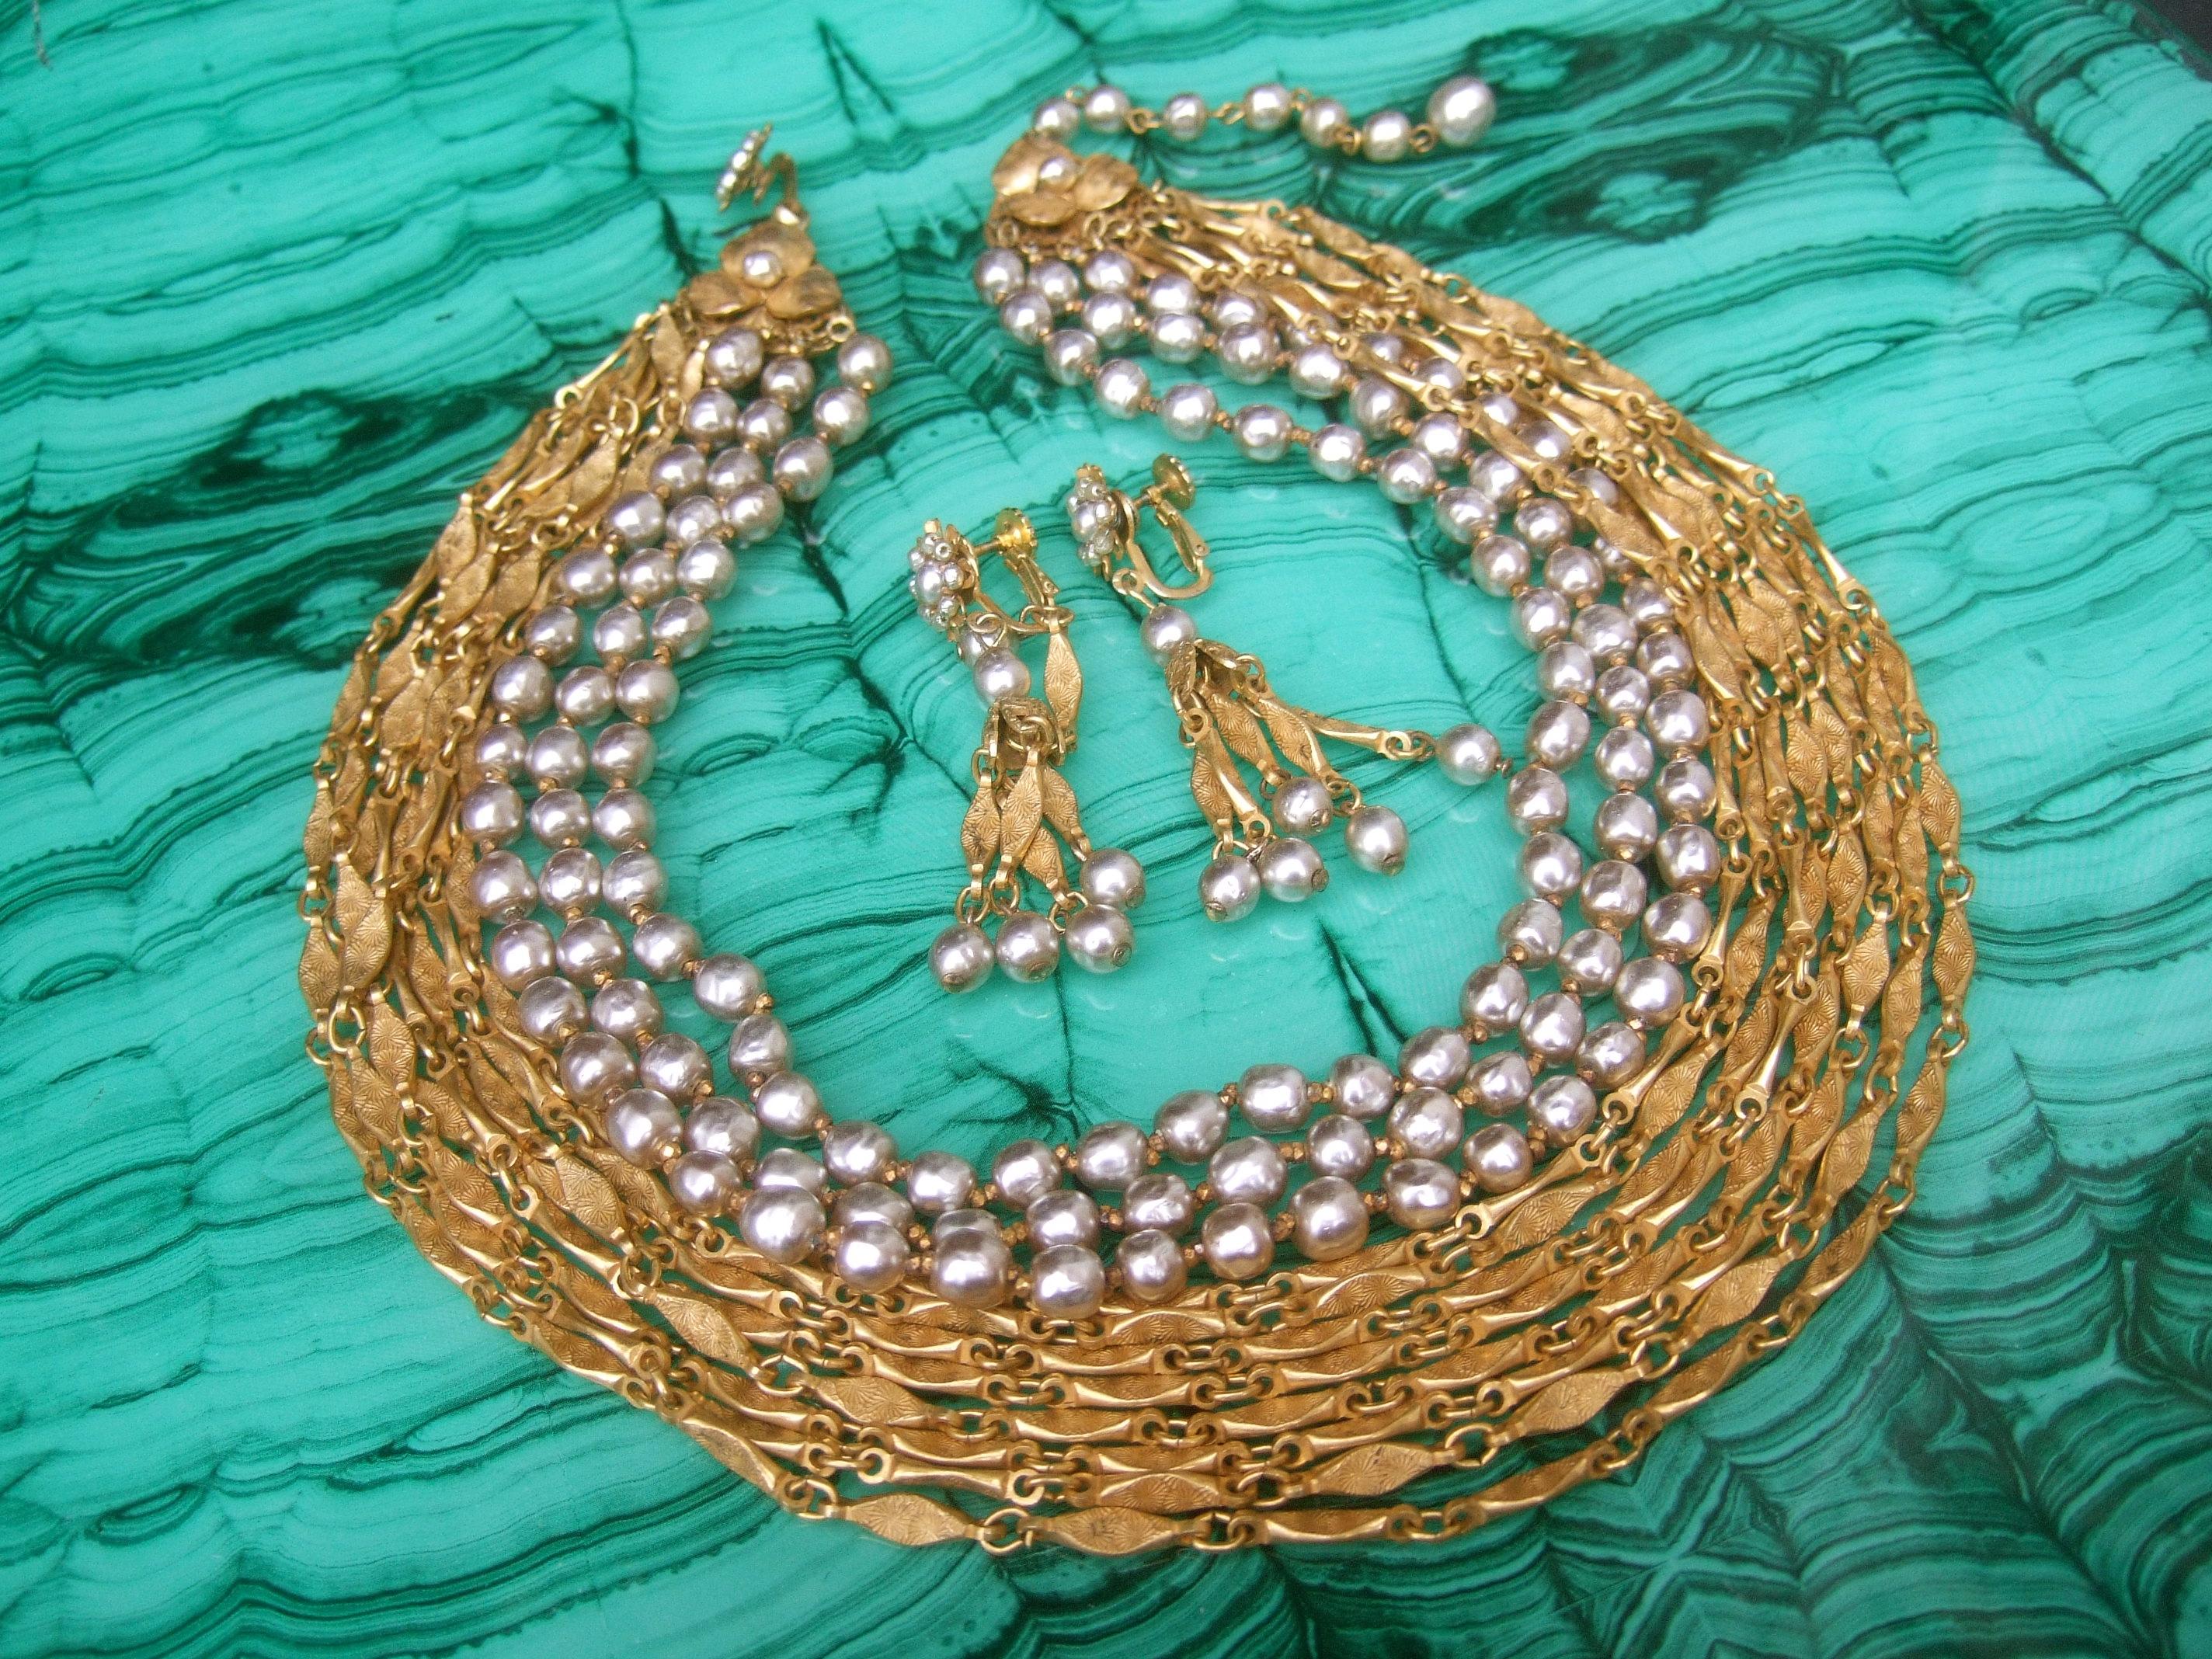 Edwardian Miriam Haskell Glass Baroque Pearls & Chains Choker Necklace & Earrings  c 1960s